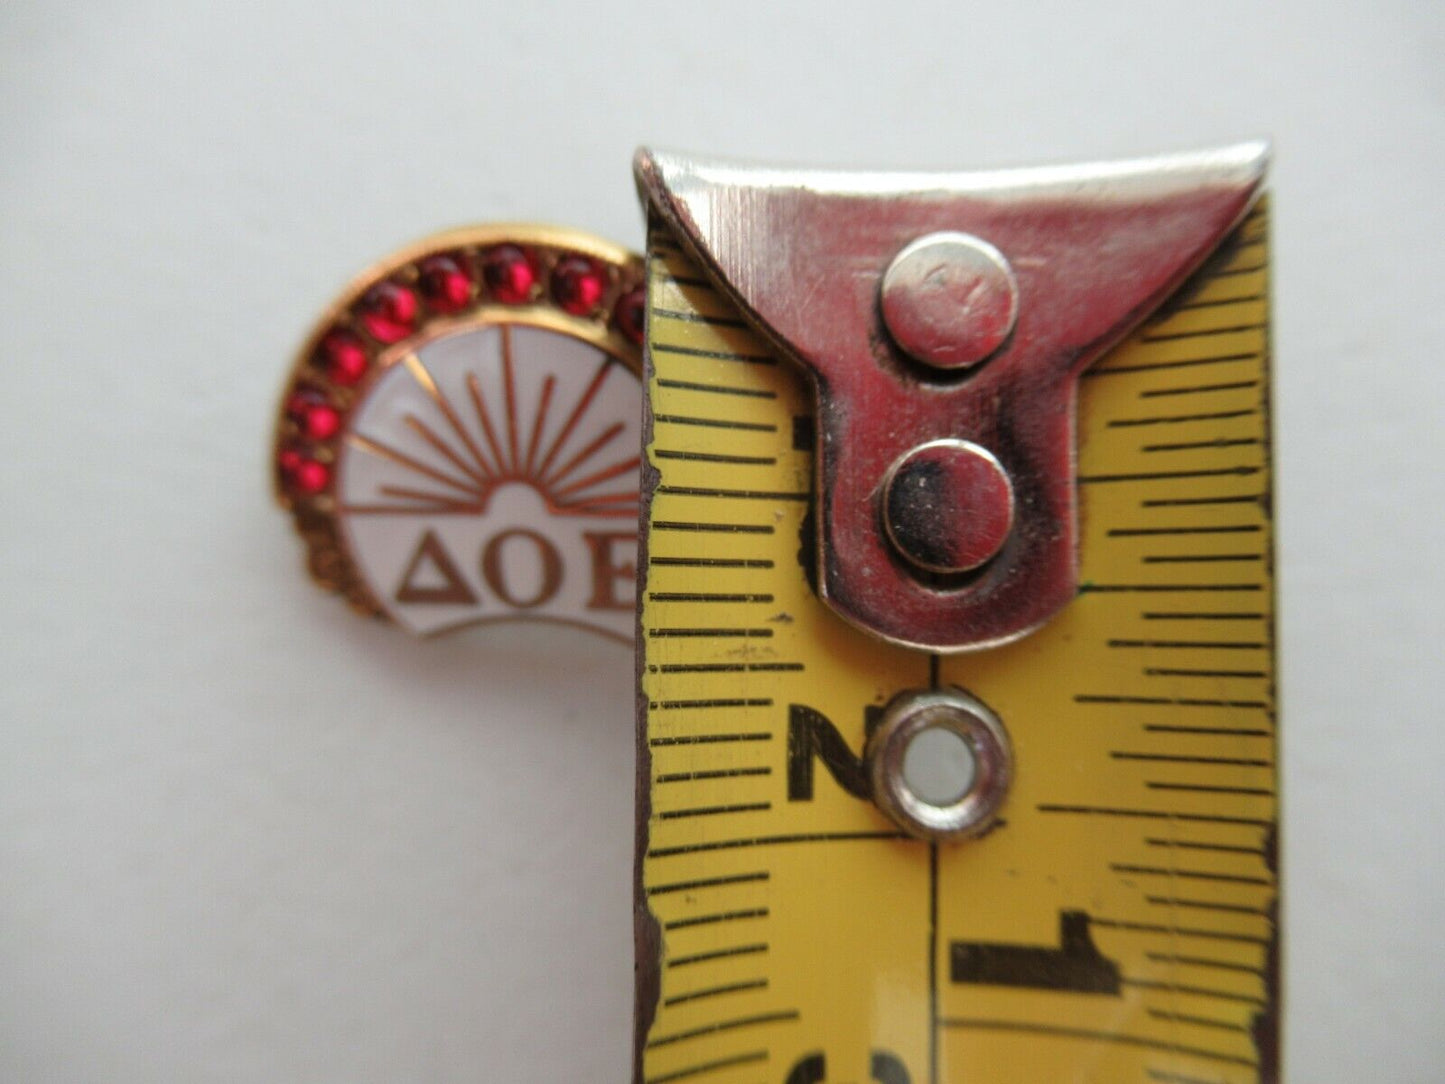 USA FRATERNITY PIN DELTA OMICRON EPSILON. MADE IN GOLD FILLED. MARKED.